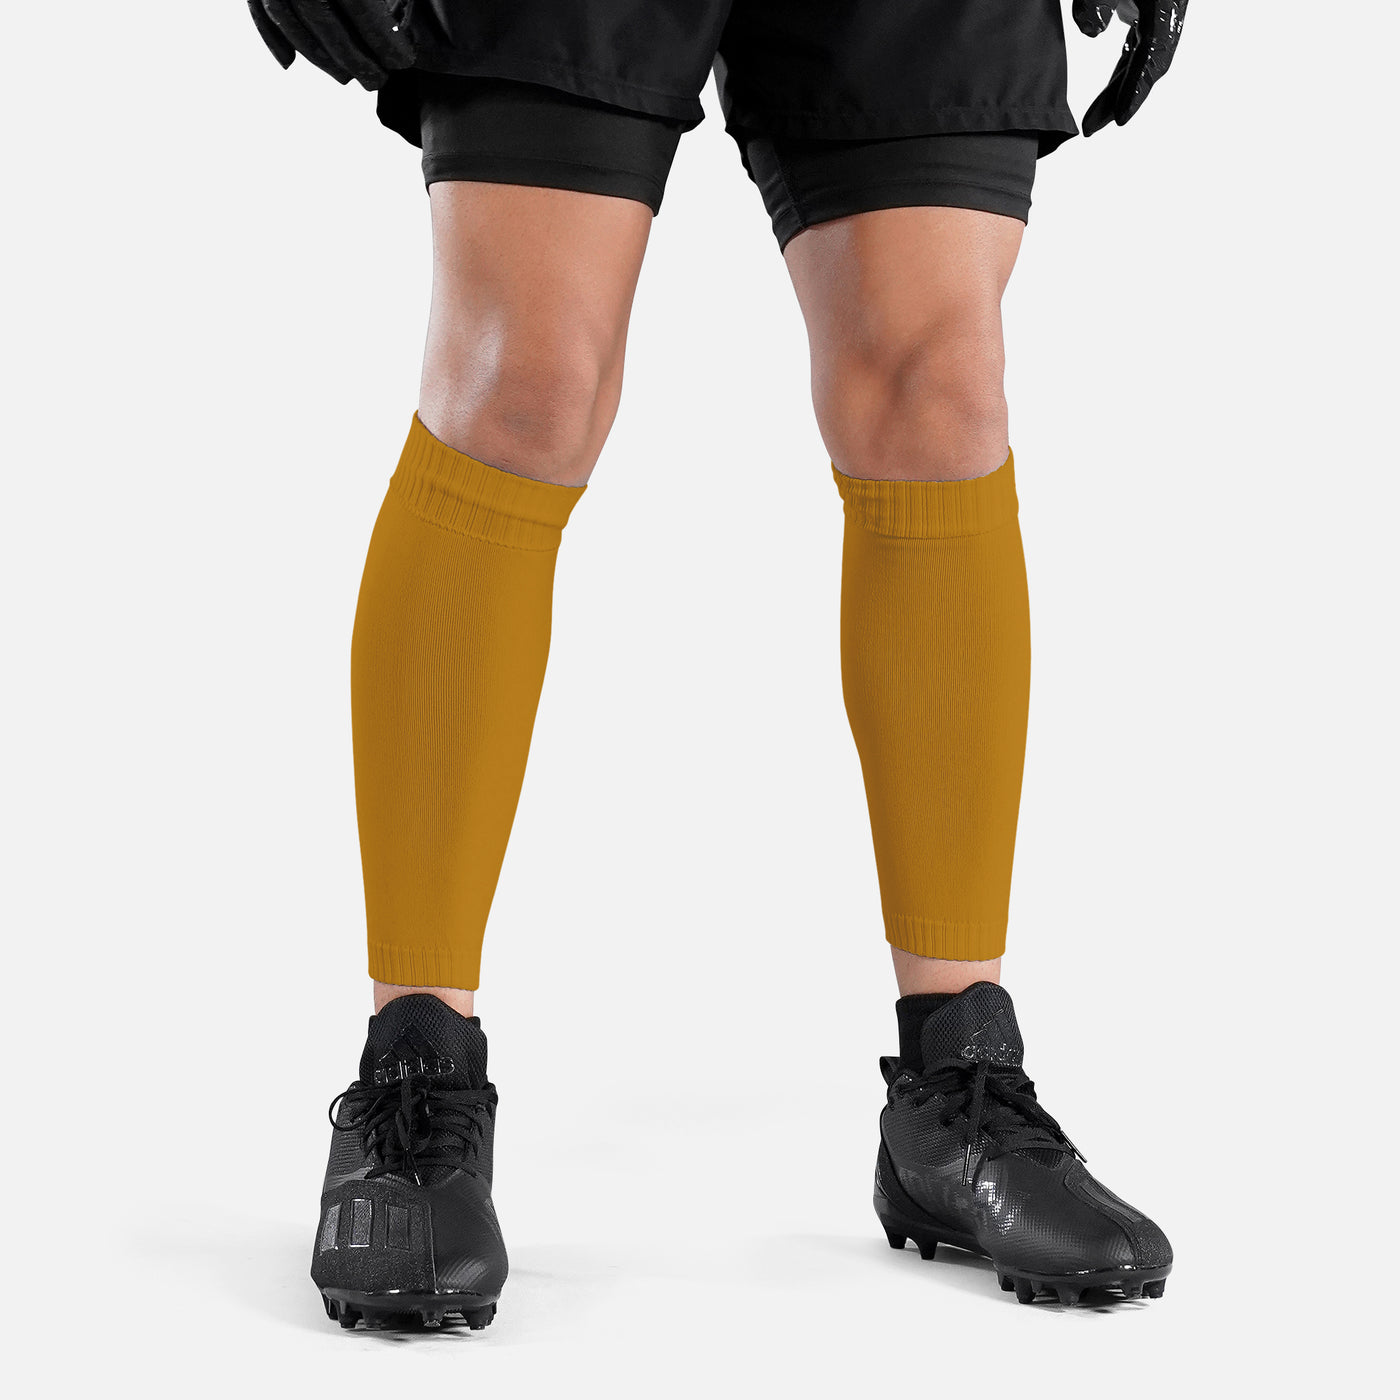 Hue Gold Knitted Compression Calf Sleeves